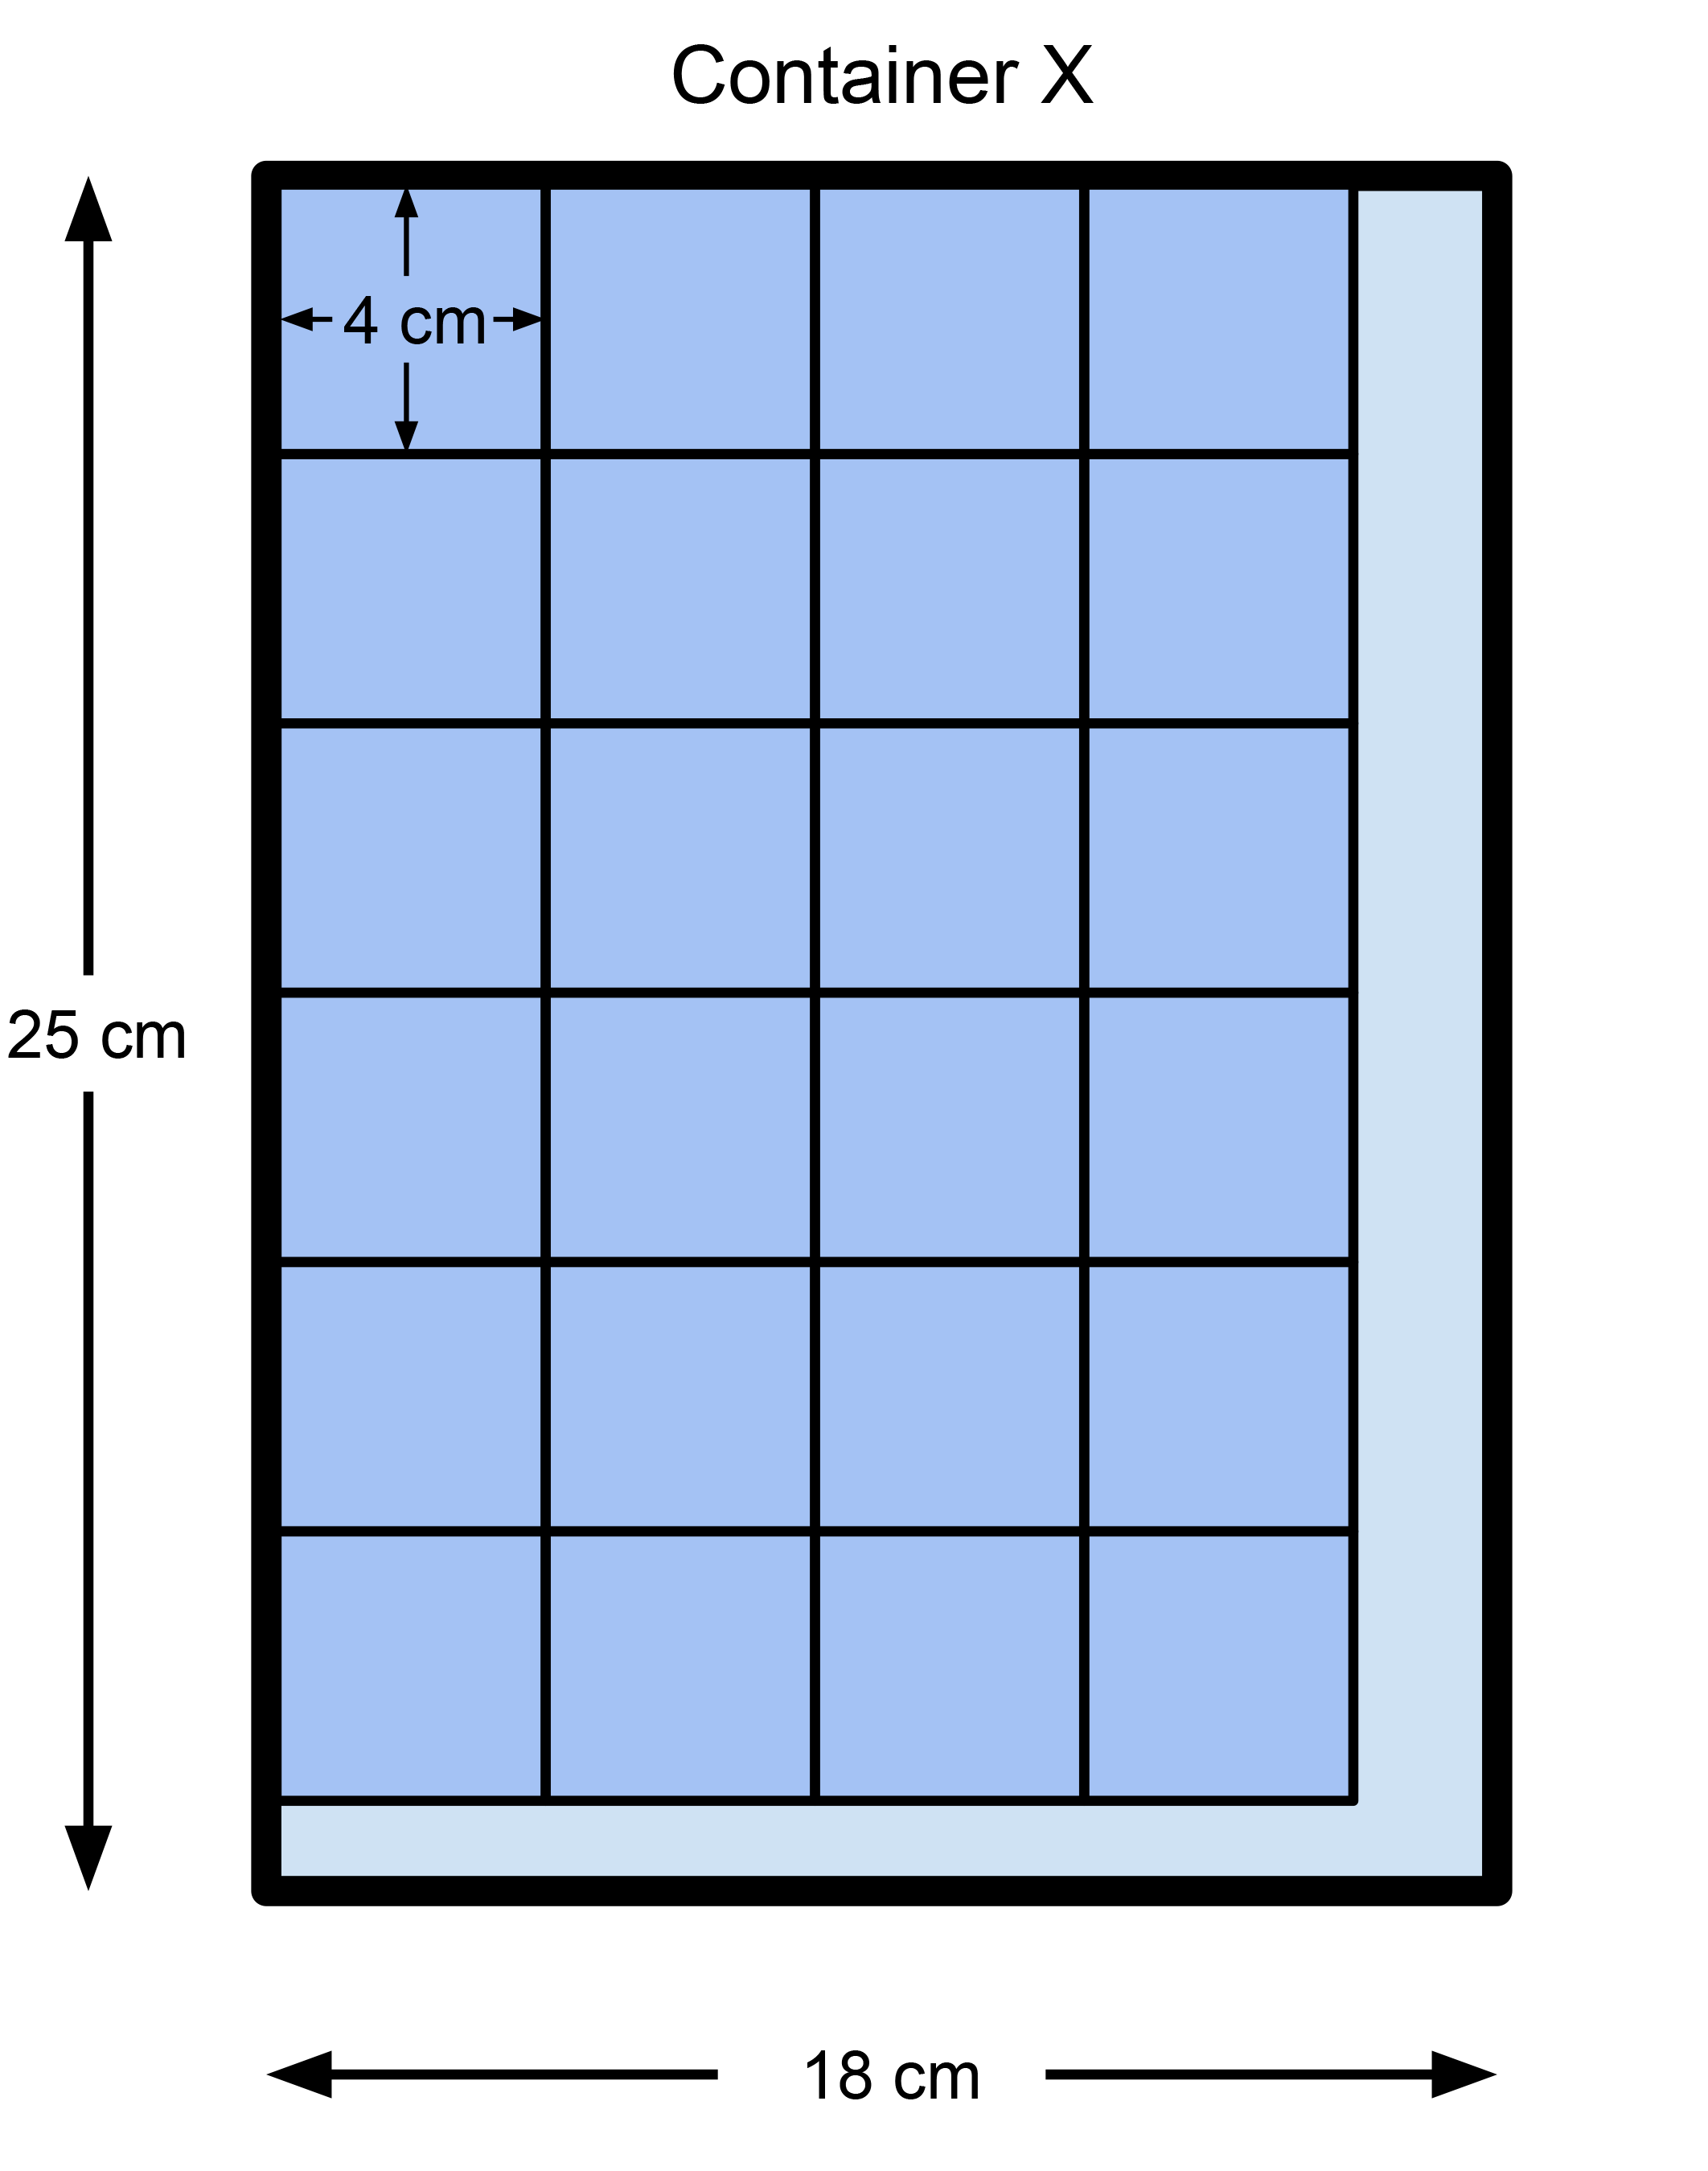 The rectangular base of Container X with length 25 centimetres and width 18 centimetres. A six by four grid of squares of side length 4 centimetres covers most of the base.